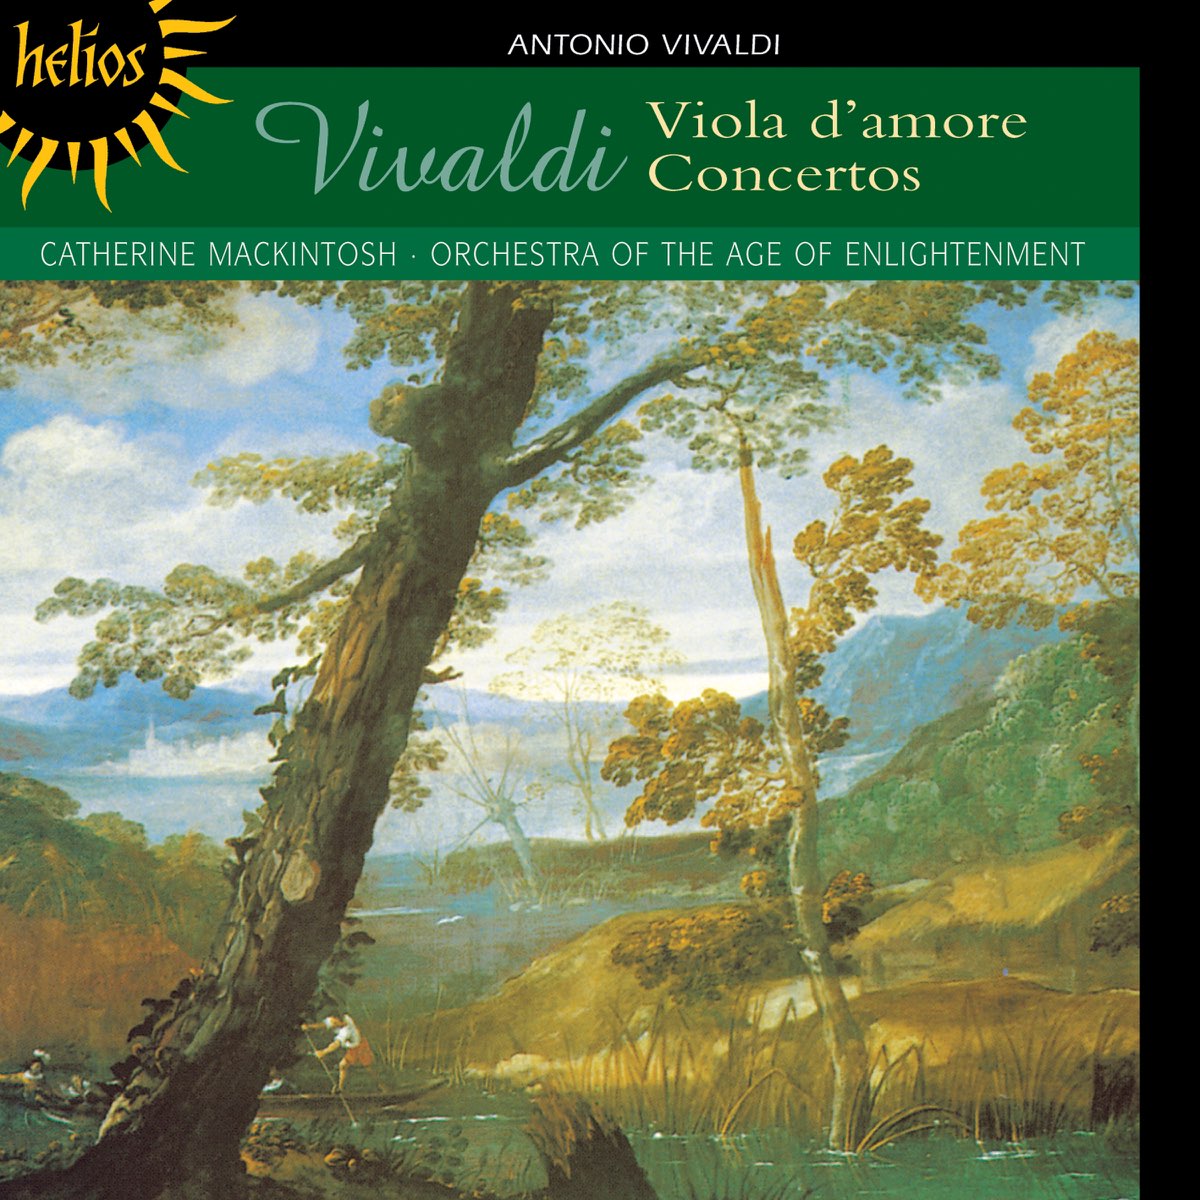 Vivaldi: Viola d'Amore Concertos - Album by Catherine Mackintosh &  Orchestra of the Age of Enlightenment - Apple Music